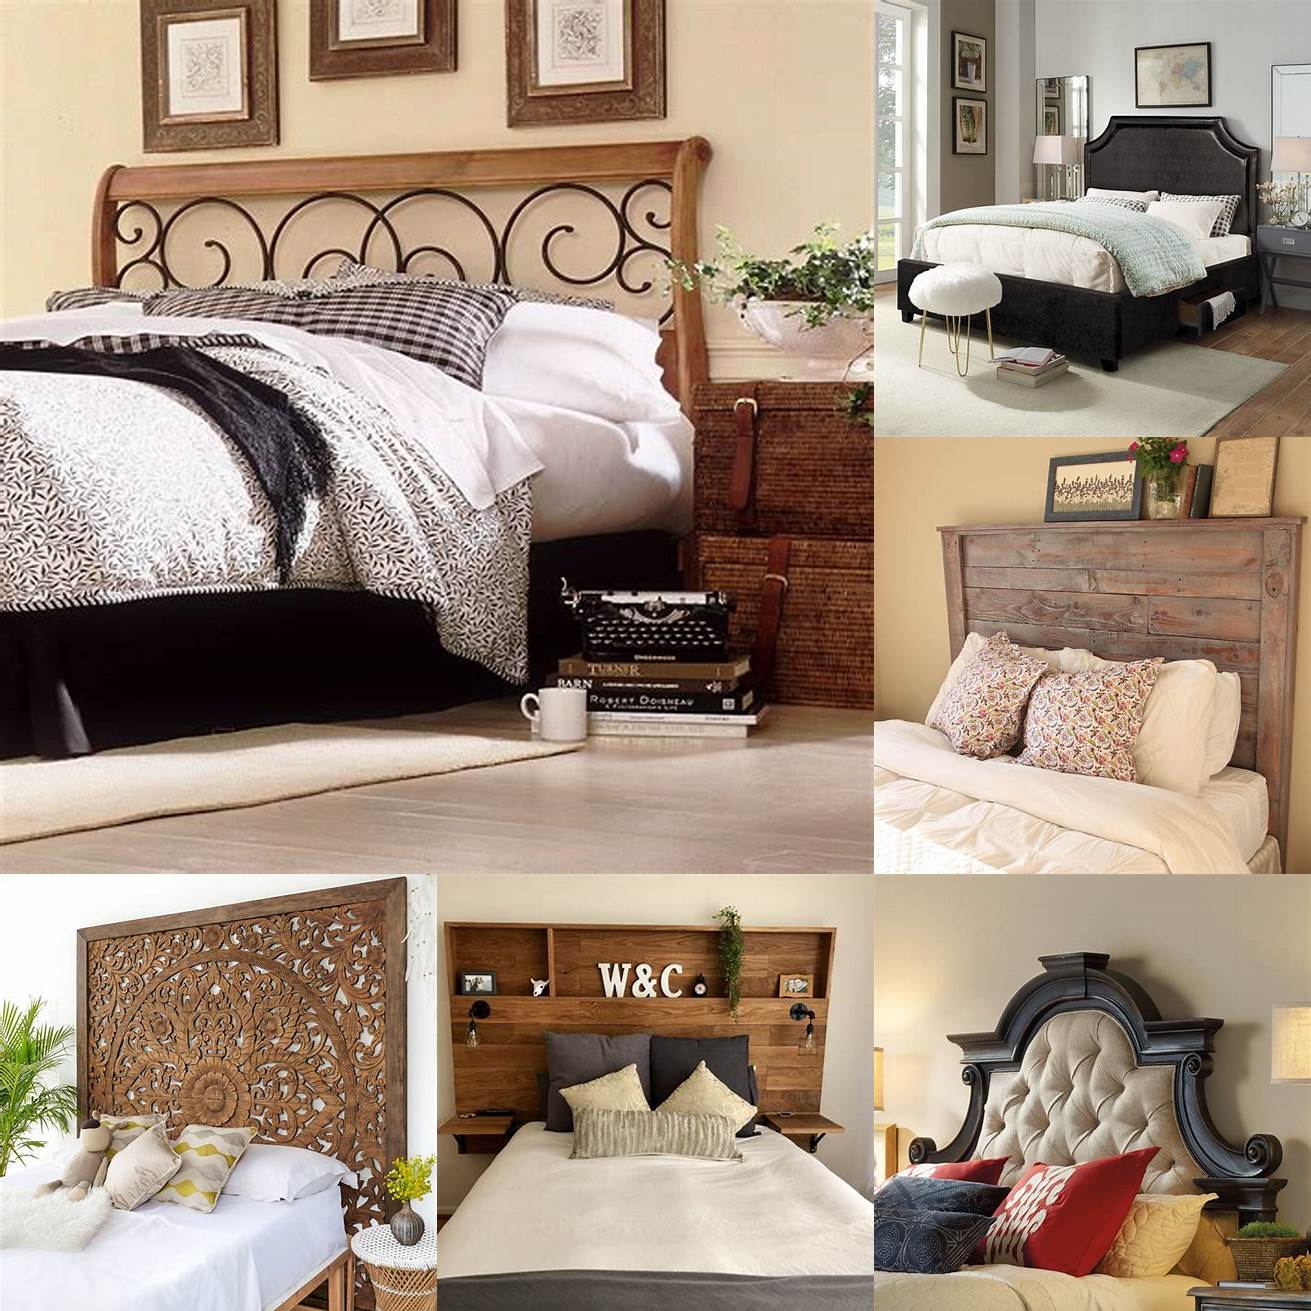 Decorative headboard and bed frame